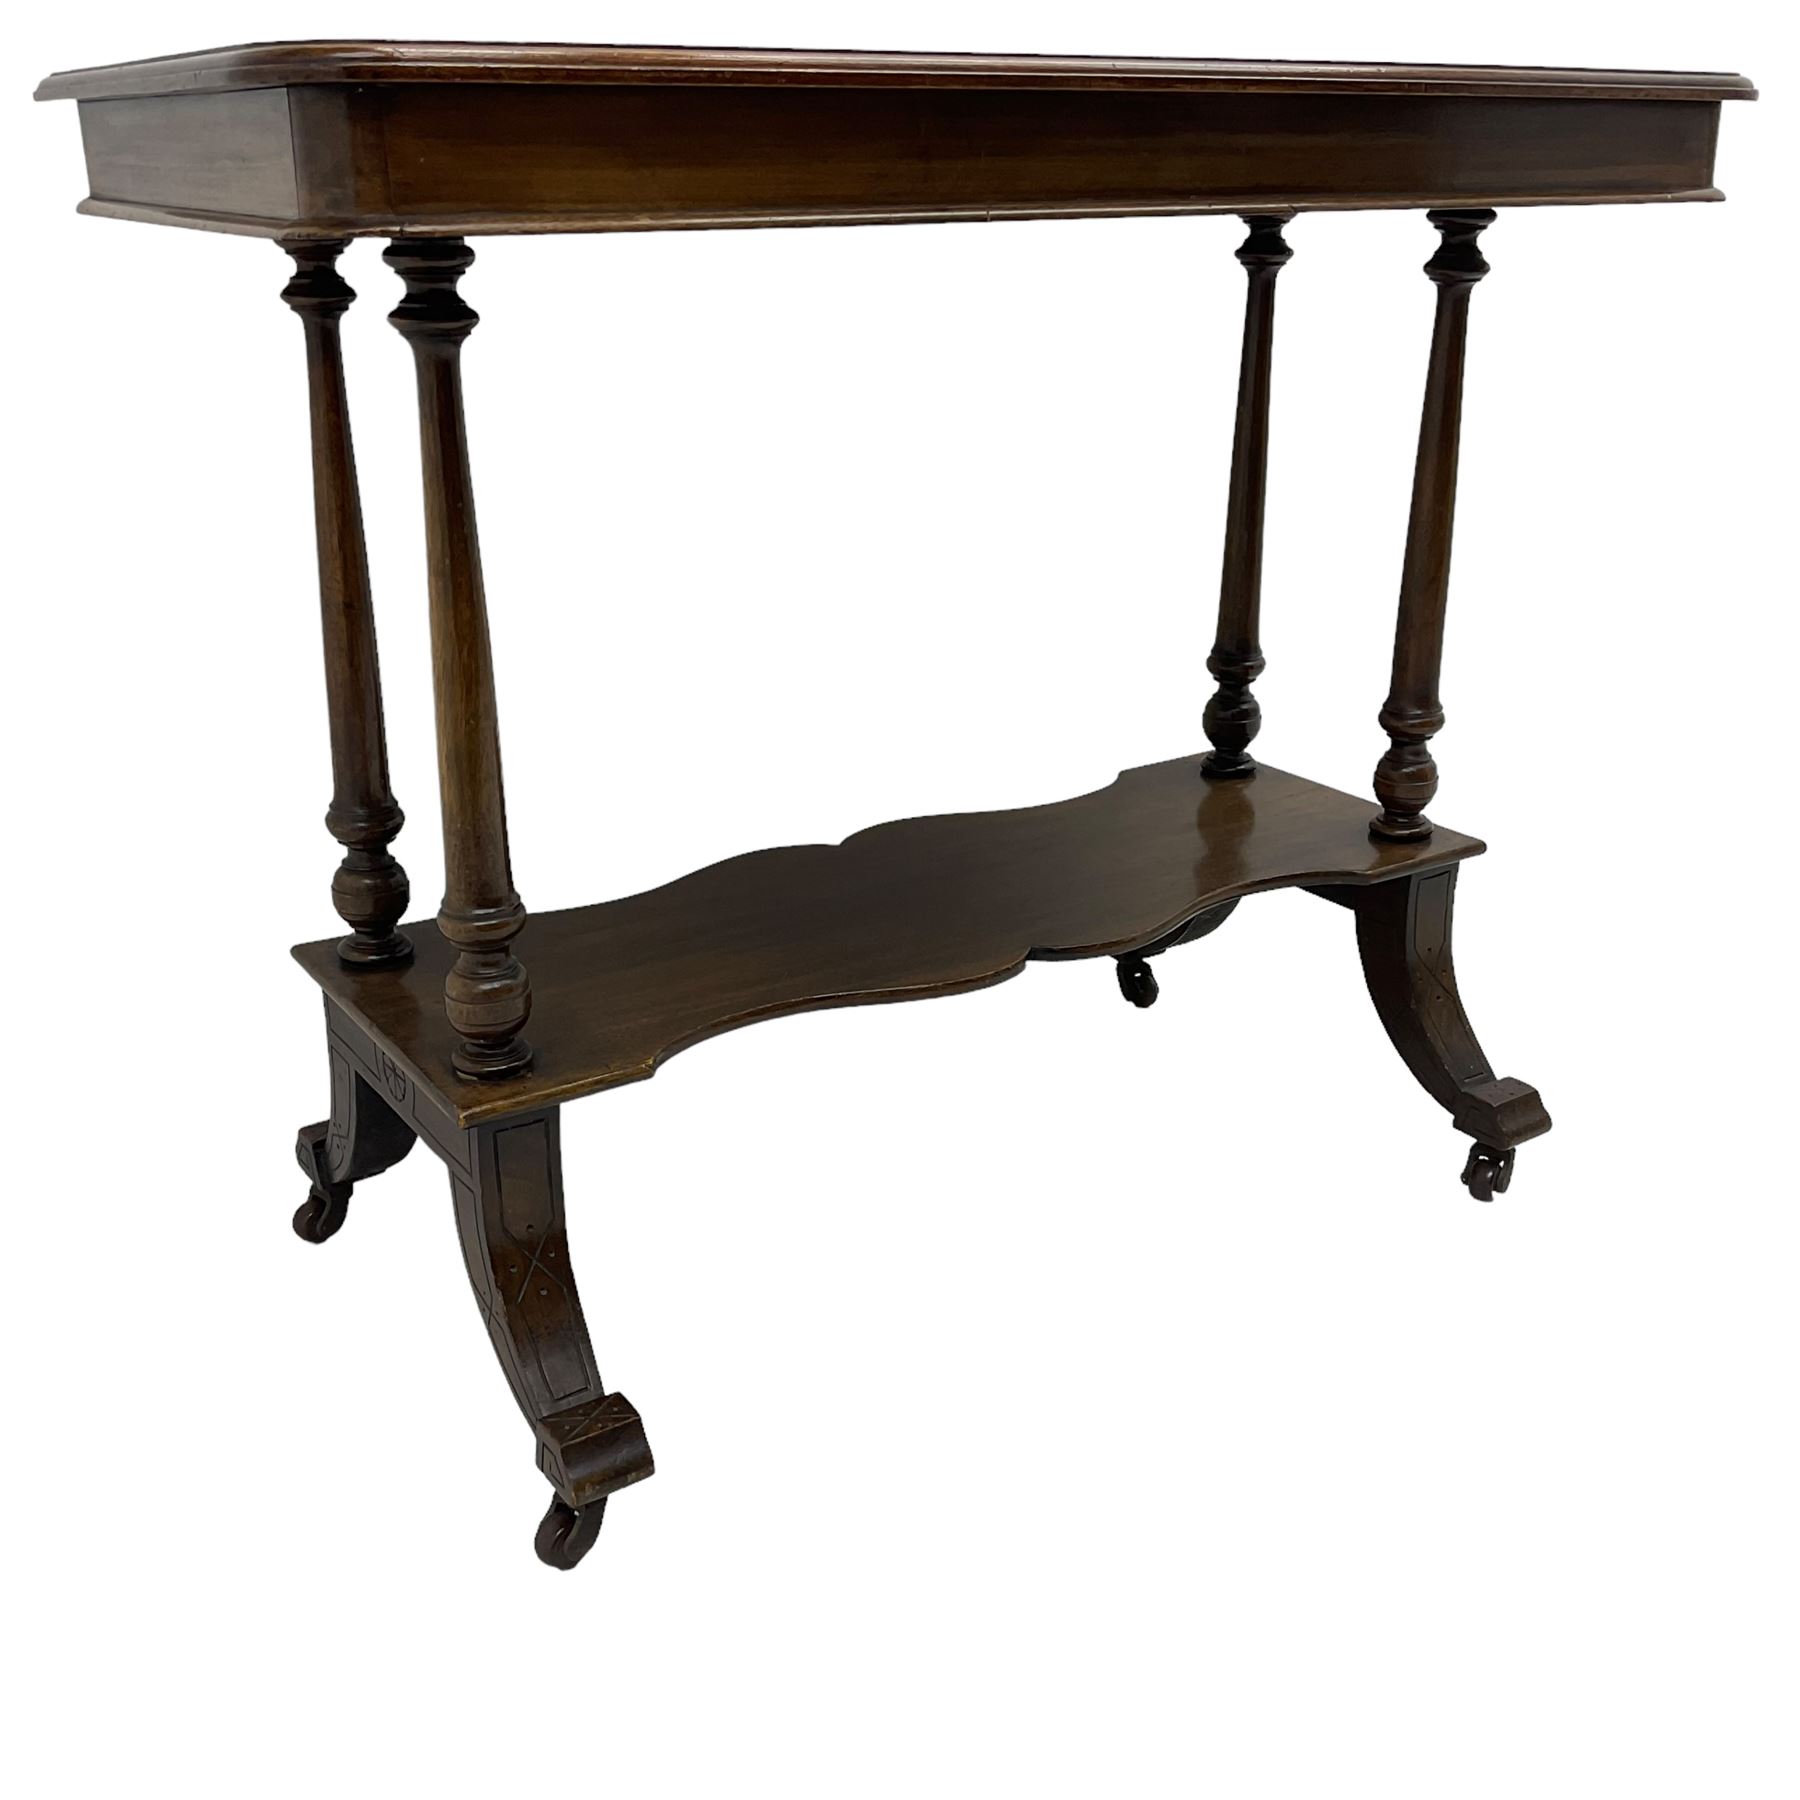 Late Victorian mahogany Aesthetic movement side table - Image 2 of 8